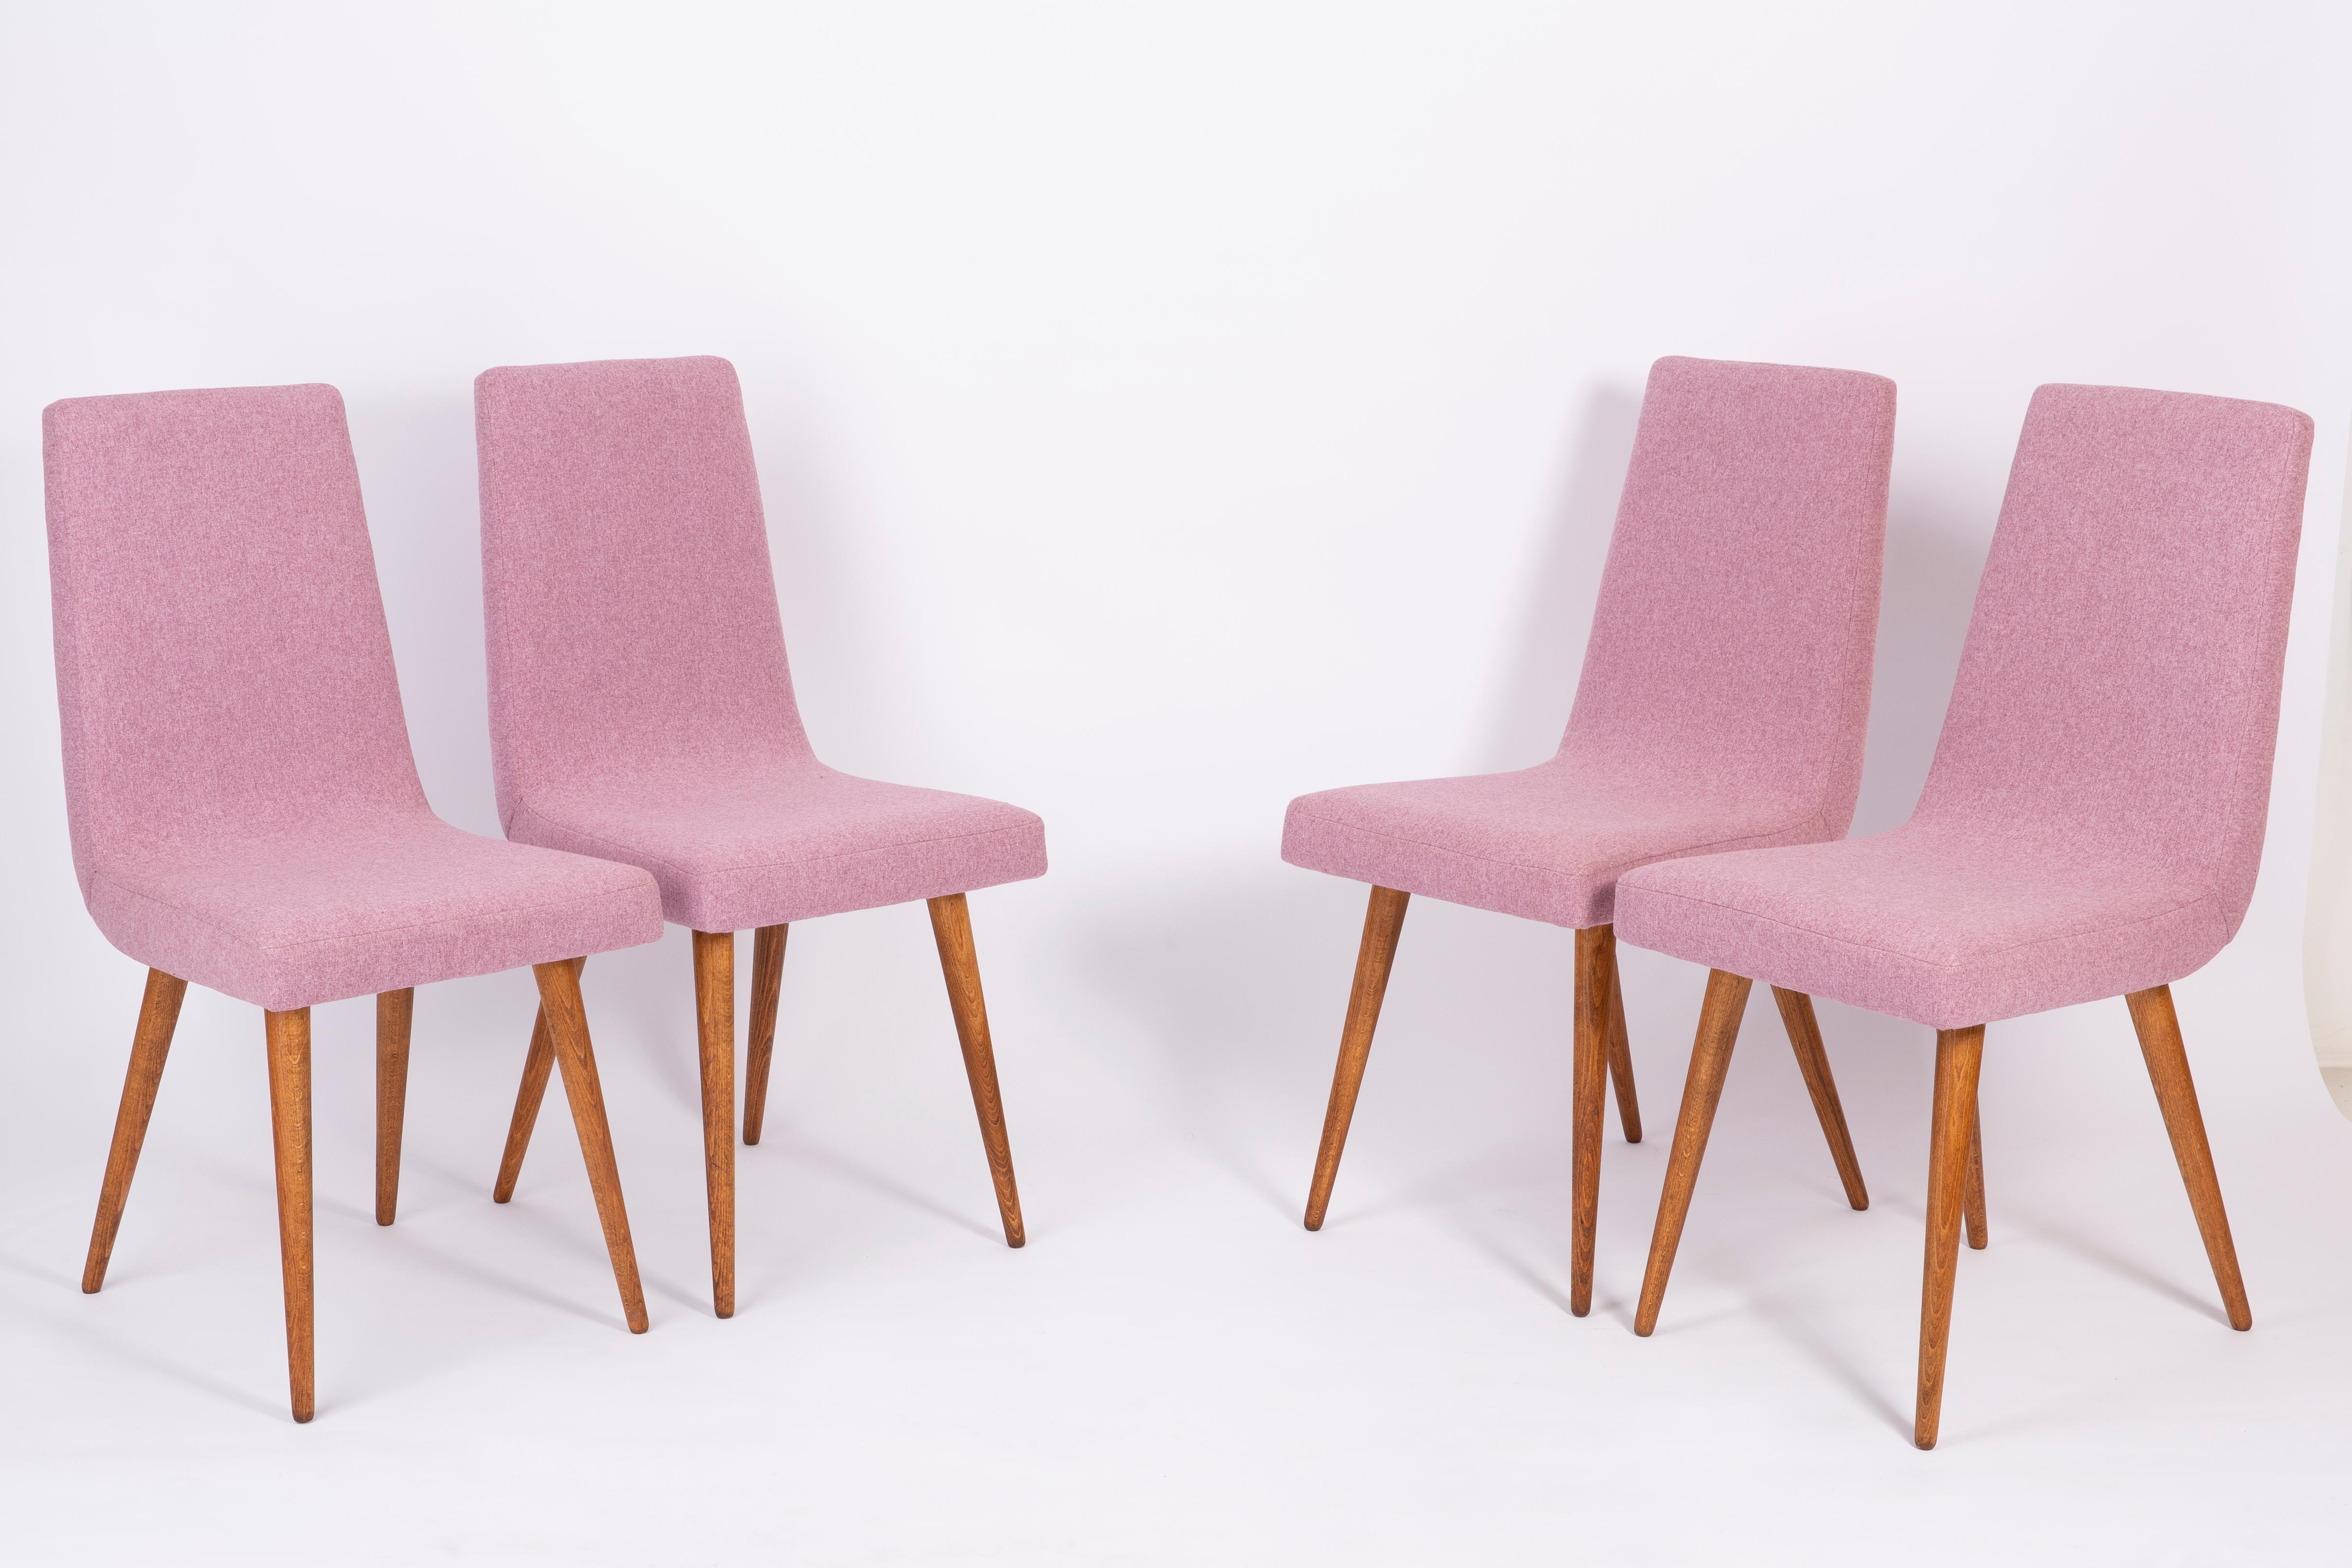 Hand-Crafted Set of Four Mid-Century Vintage Pink Melange Chairs, Europe, 1960s For Sale